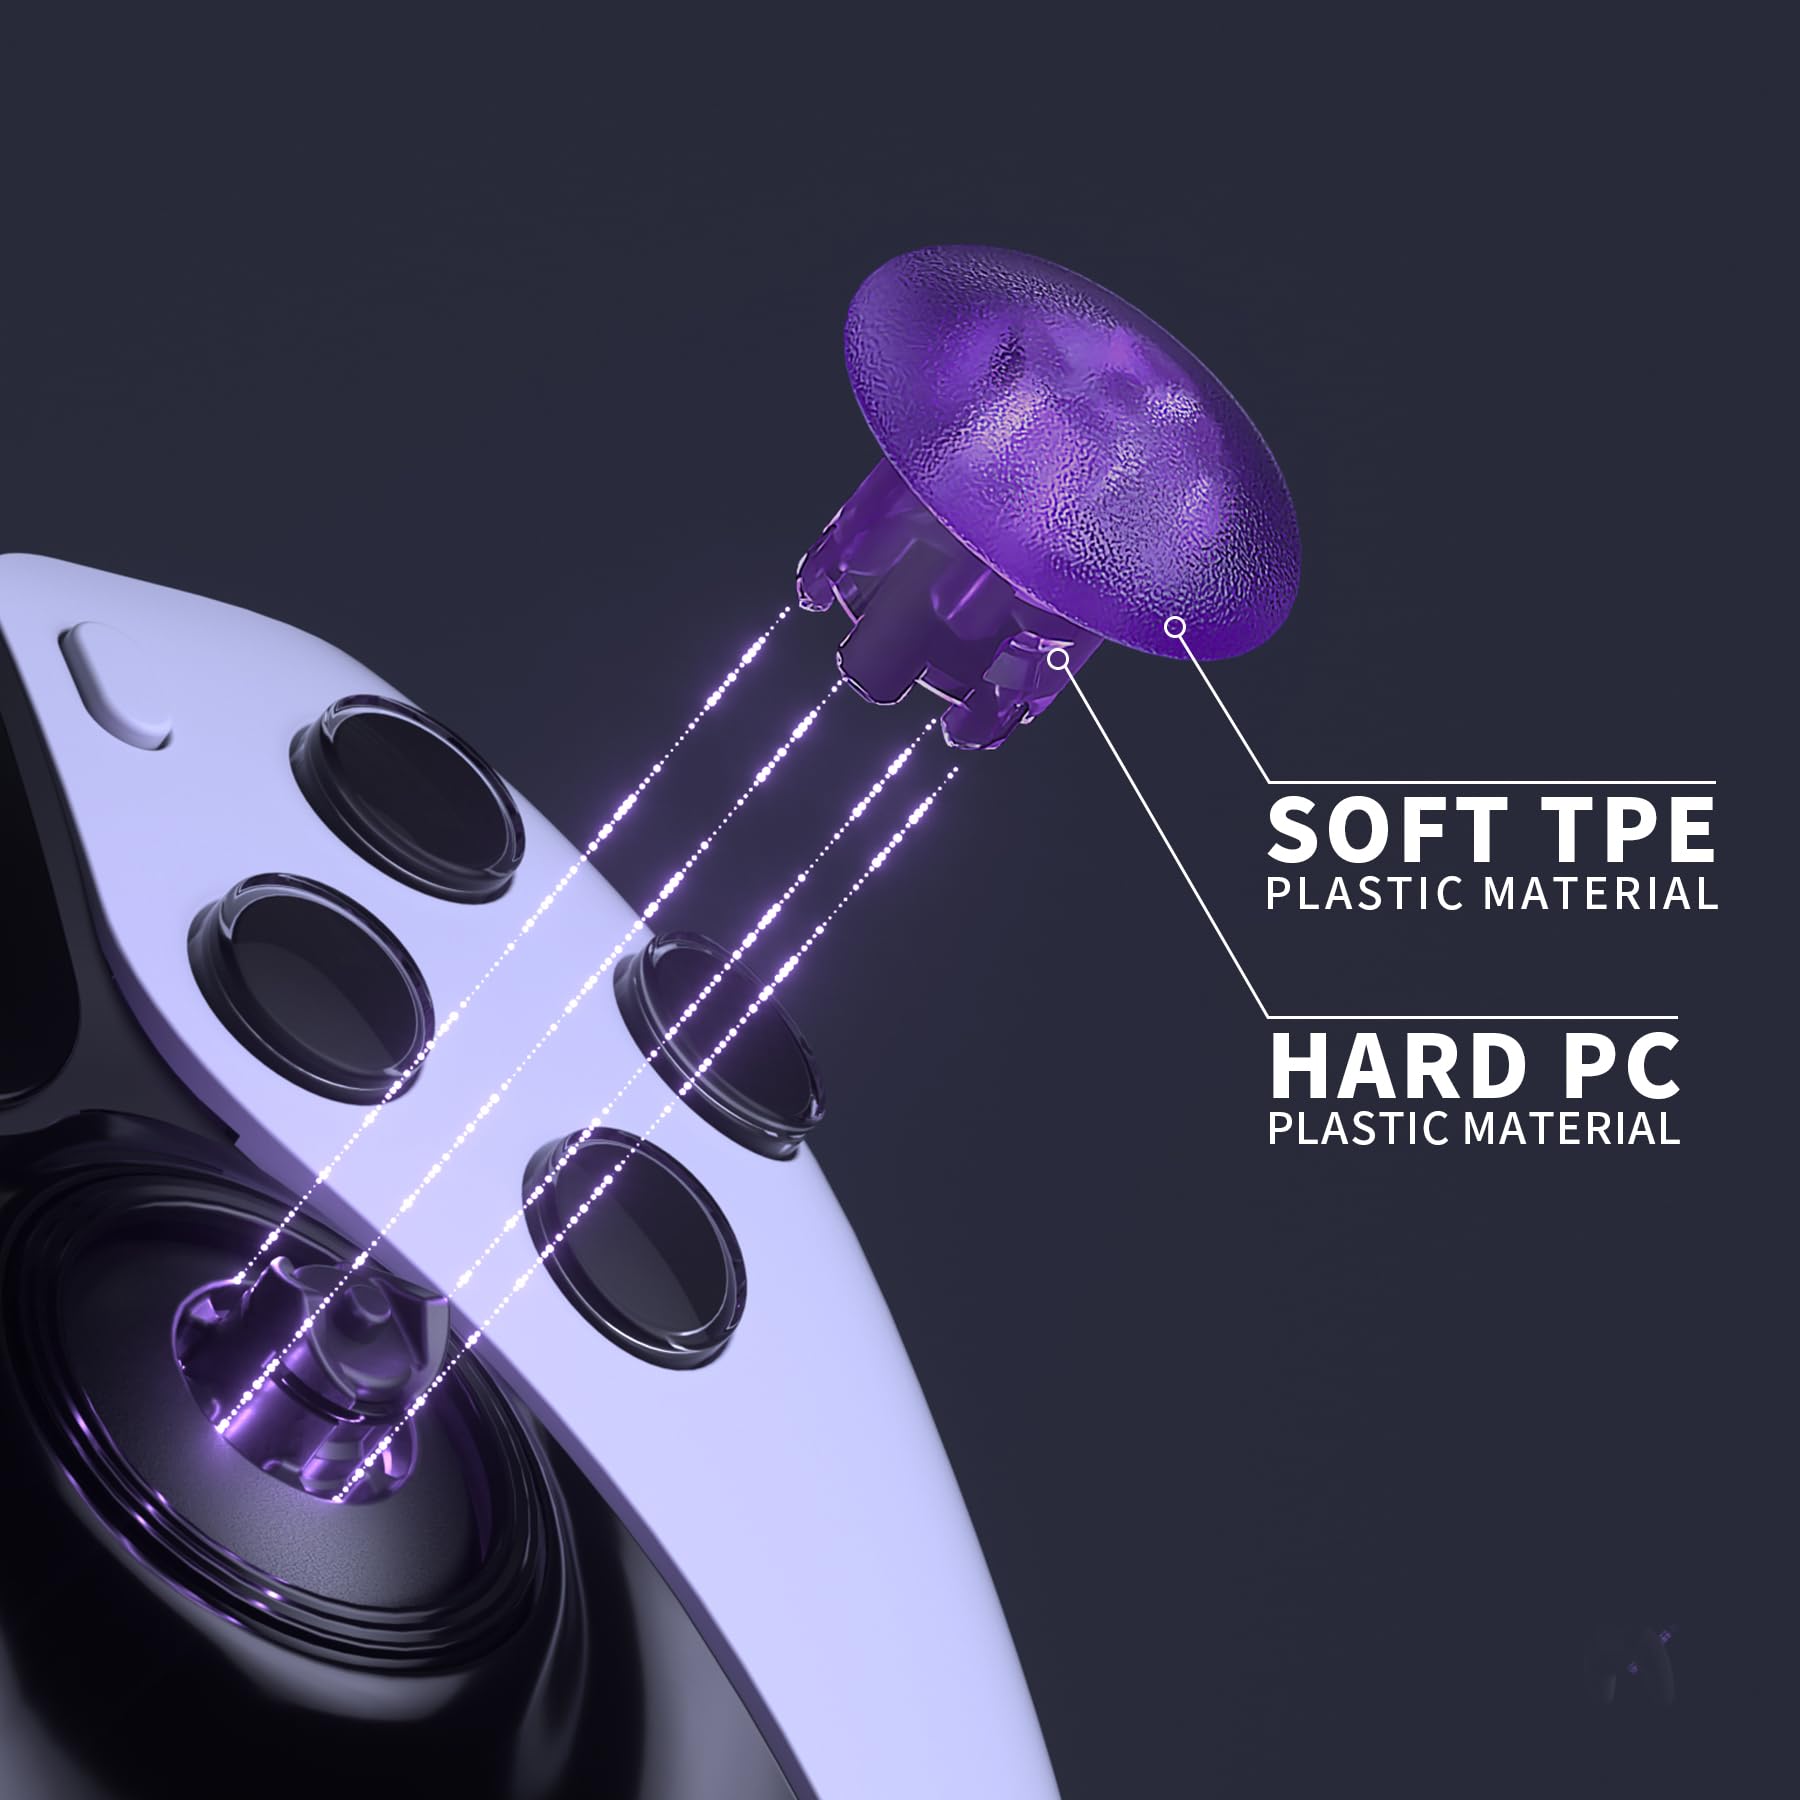 eXtremeRate Clear Atomic Purple Replacement Swappable Thumbsticks for PS5 Edge Controller, Interchangeable Analog Stick Joystick Caps for PS5 Edge Controller - Without Controller & Thumbsticks Base